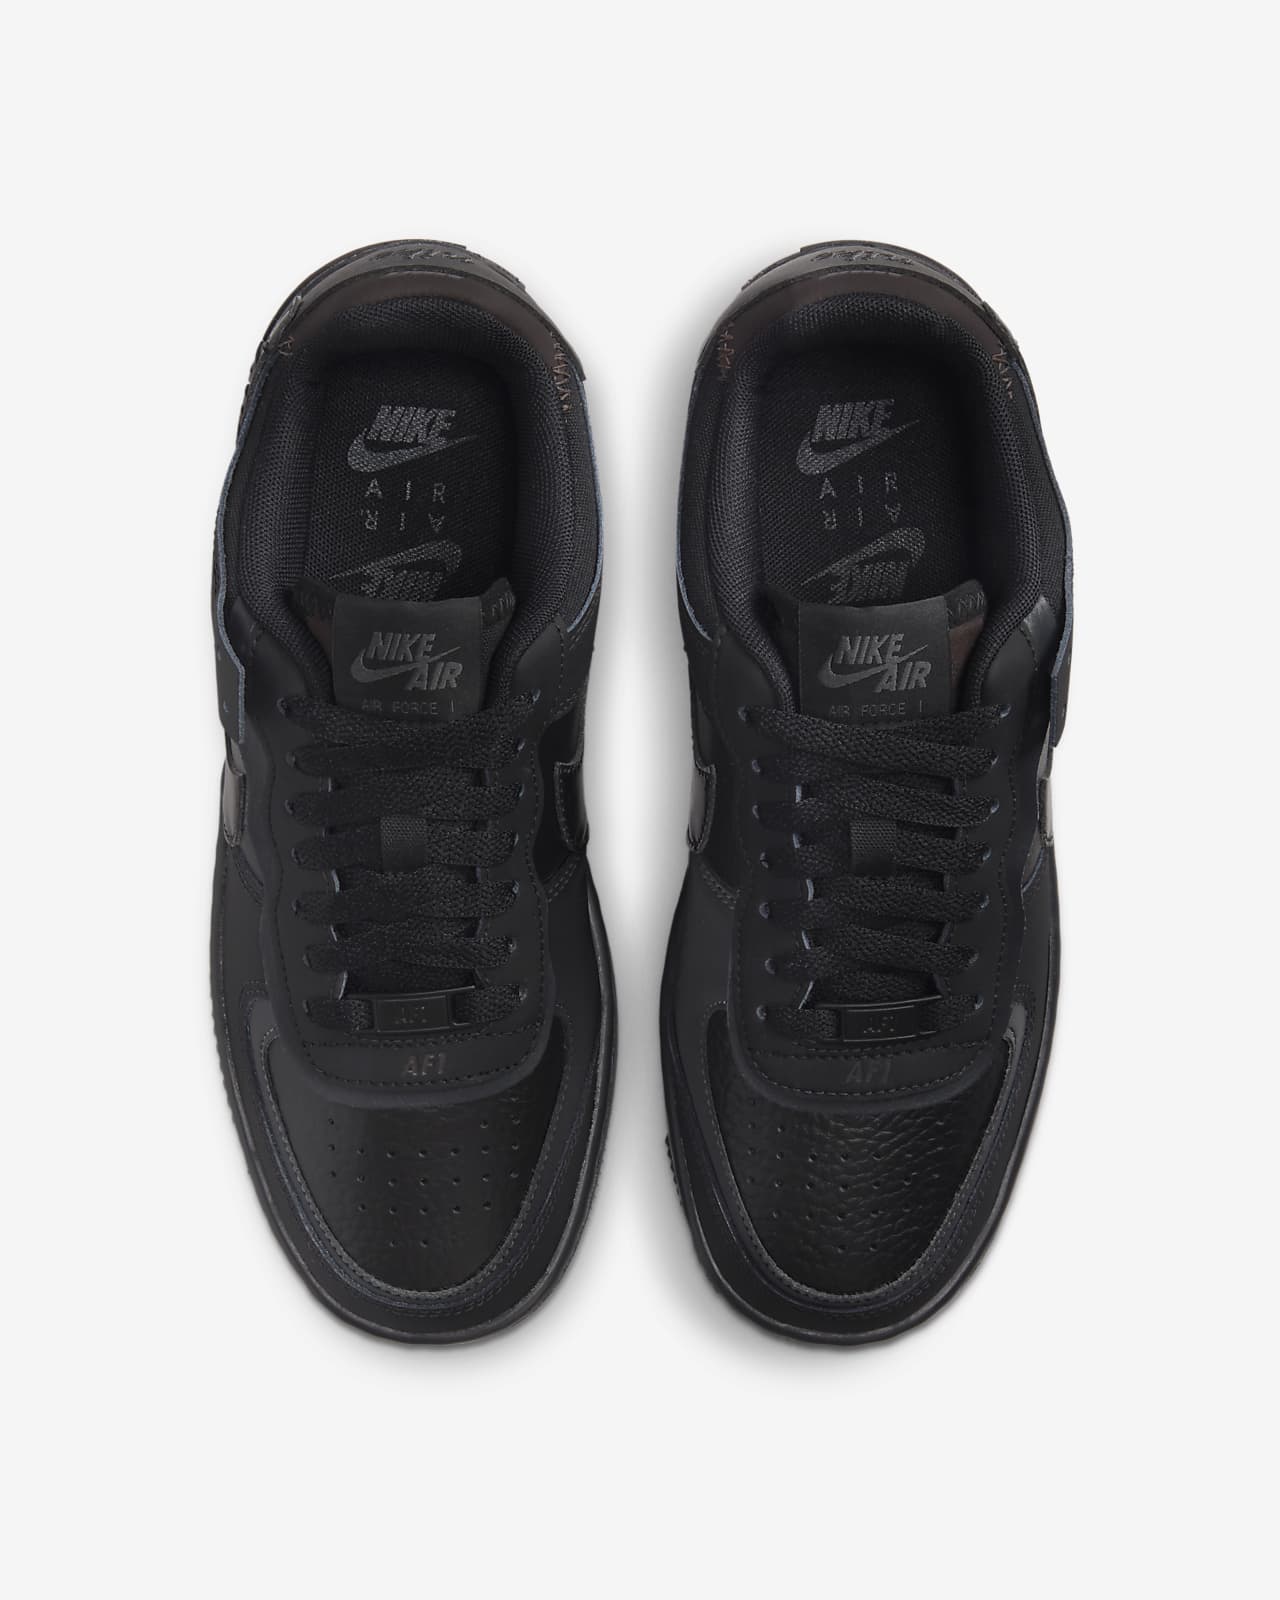 【25cm】NIKE WMNS AIR FORCE 1 LOW SHADOWレディース